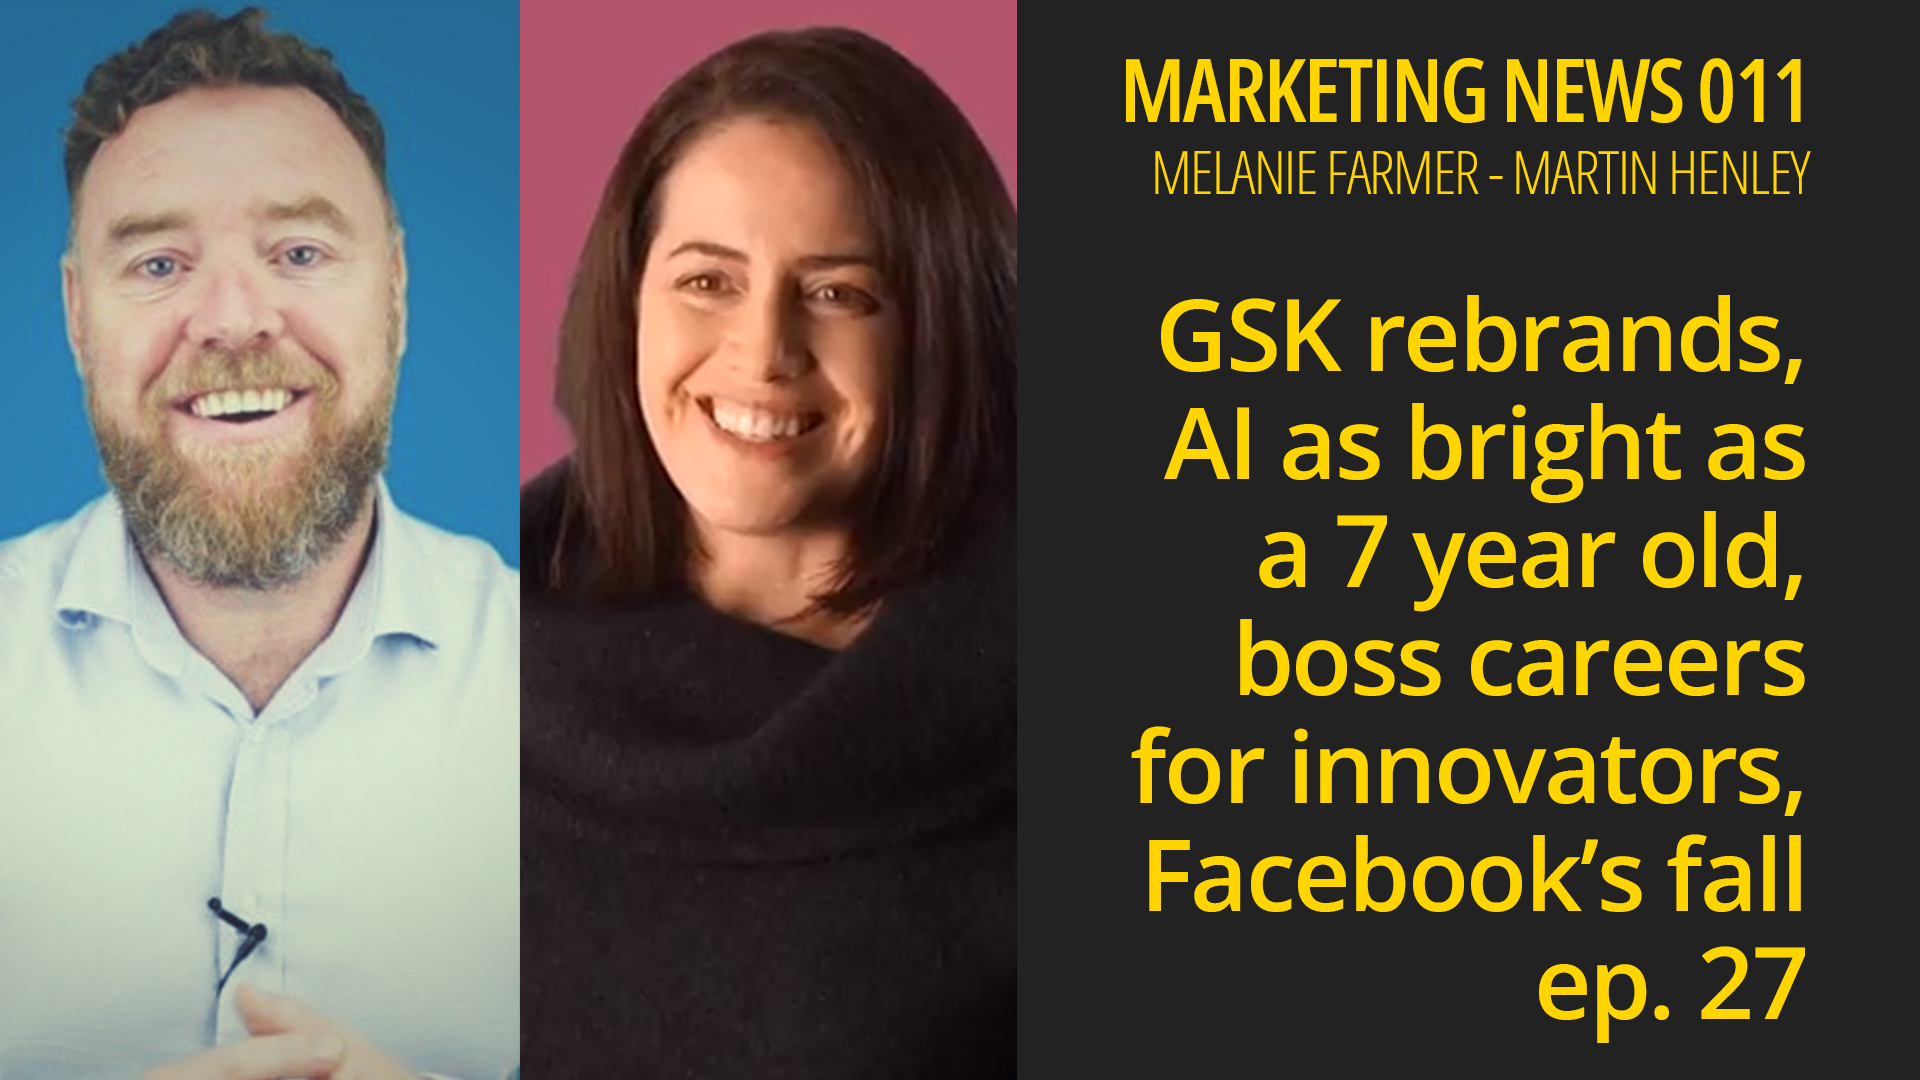 Marketing News 011 – GSK rebrand, AI bright as a 7yr old, careers for innovators, Facebook’s fall￼